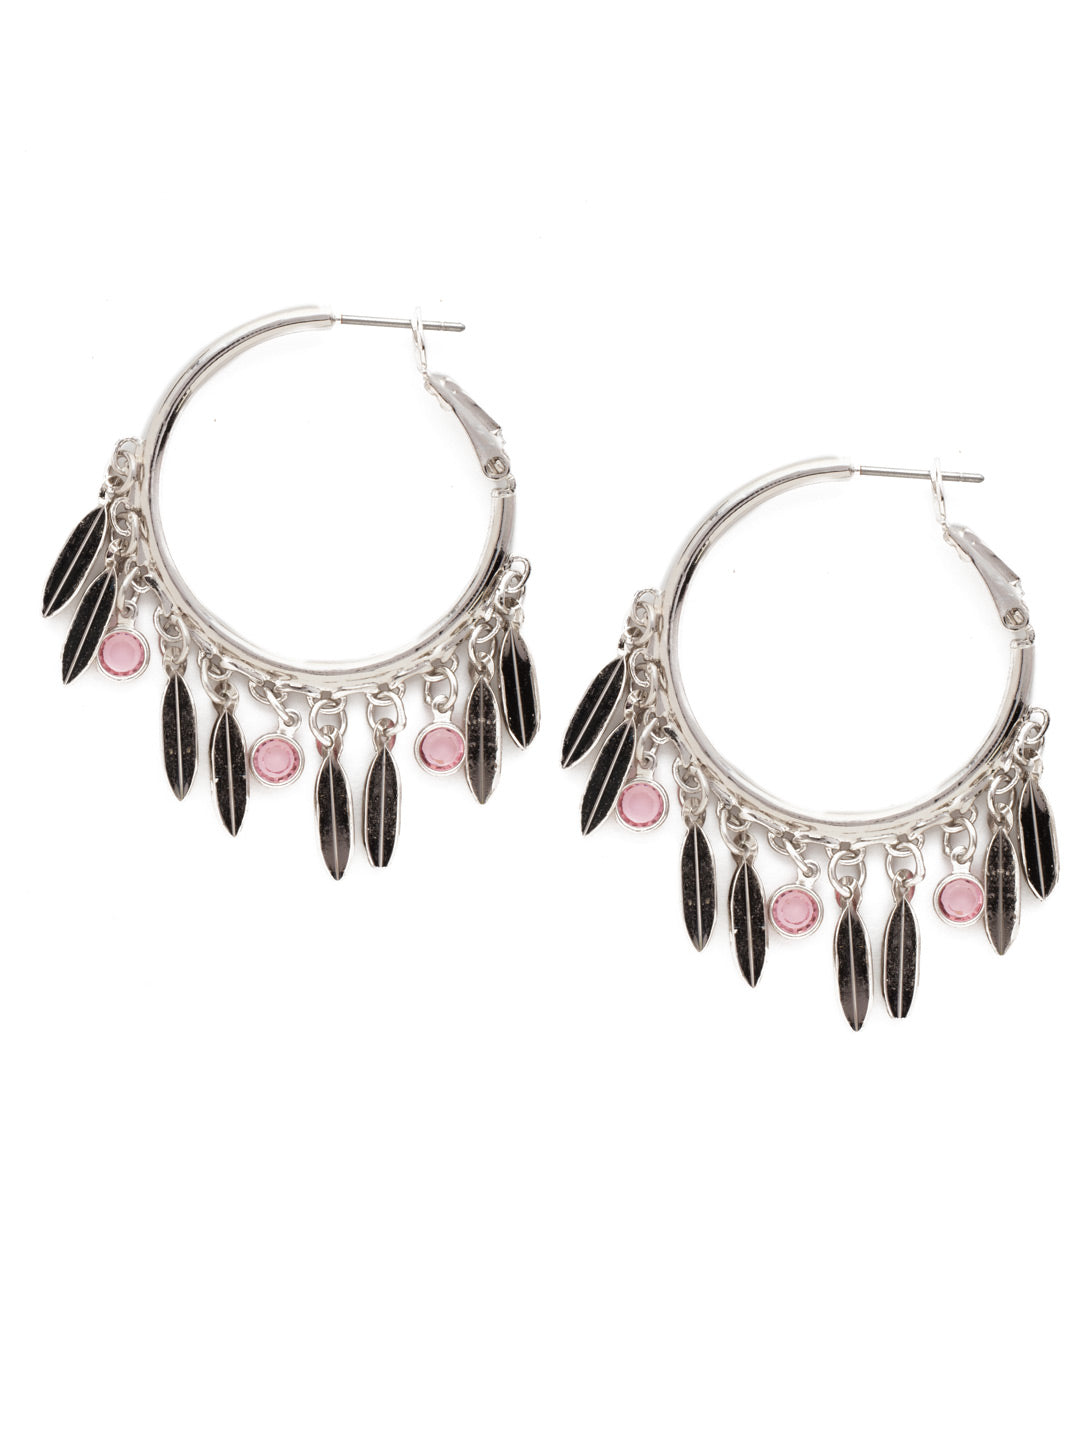 Carrington Hoop Earring - EEK35RHSSU - <p>Who doesn't love a good pair of hoop earrings? Grab this pair dripping with metal leaf accents and shimmering crystals, too. From Sorrelli's Seersucker collection in our Palladium Silver-tone finish.</p>